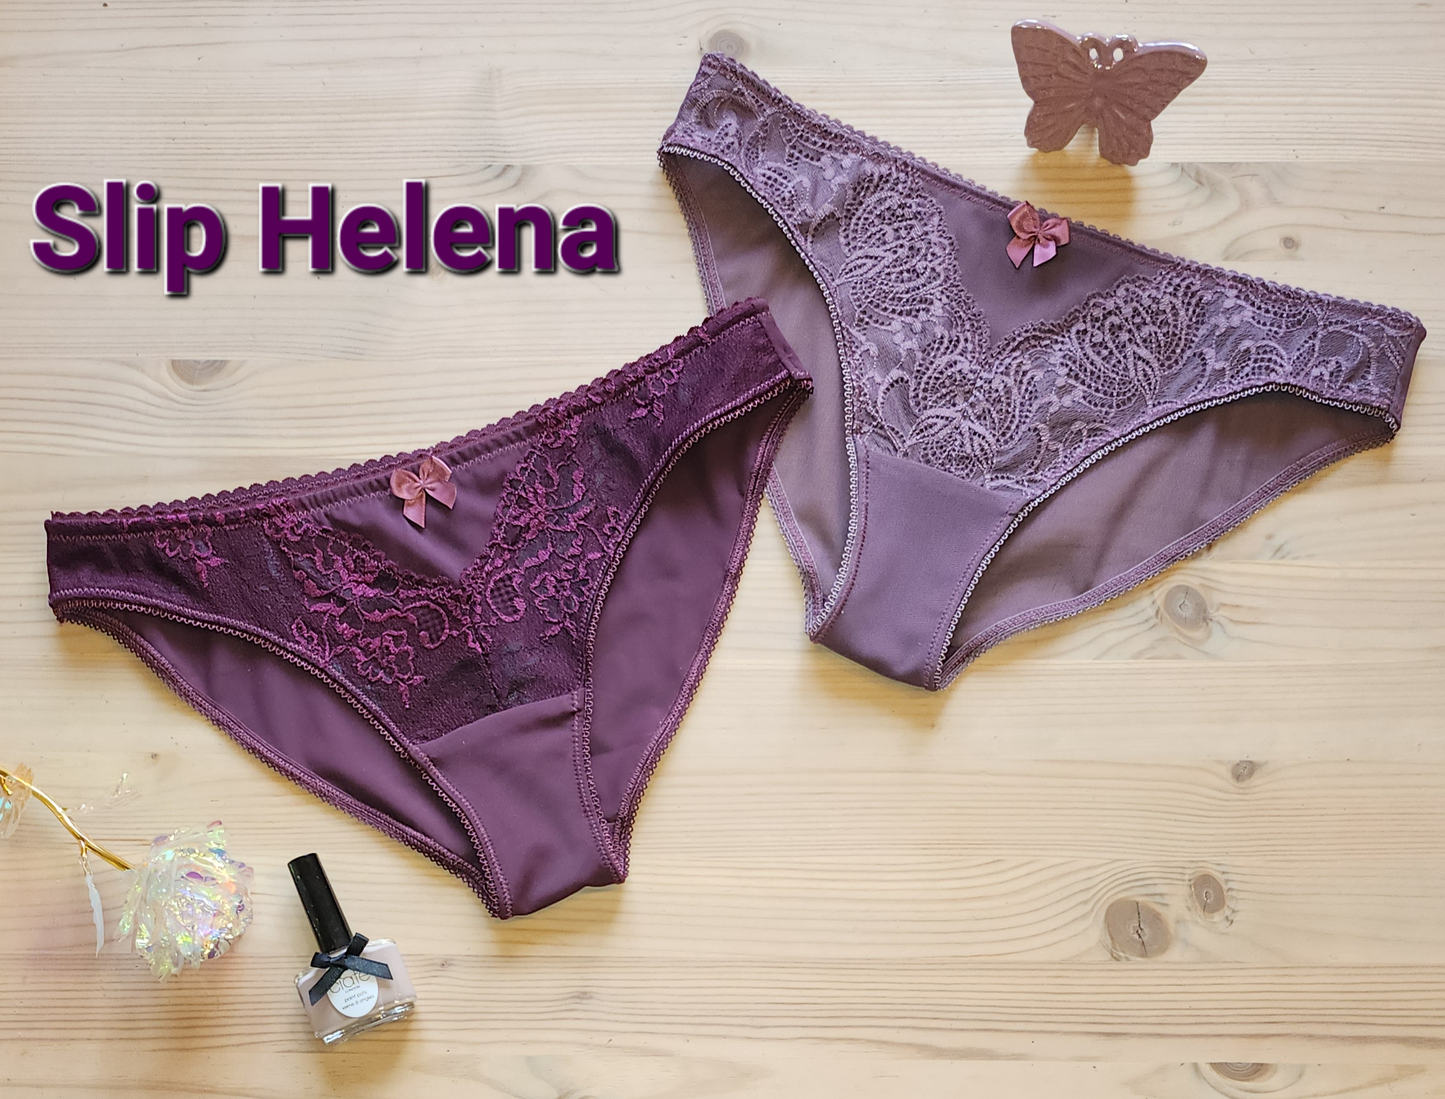 Sewing package for 2 Helena briefs with microfiber and <tc>lace</tc> crocus IDsnsx2